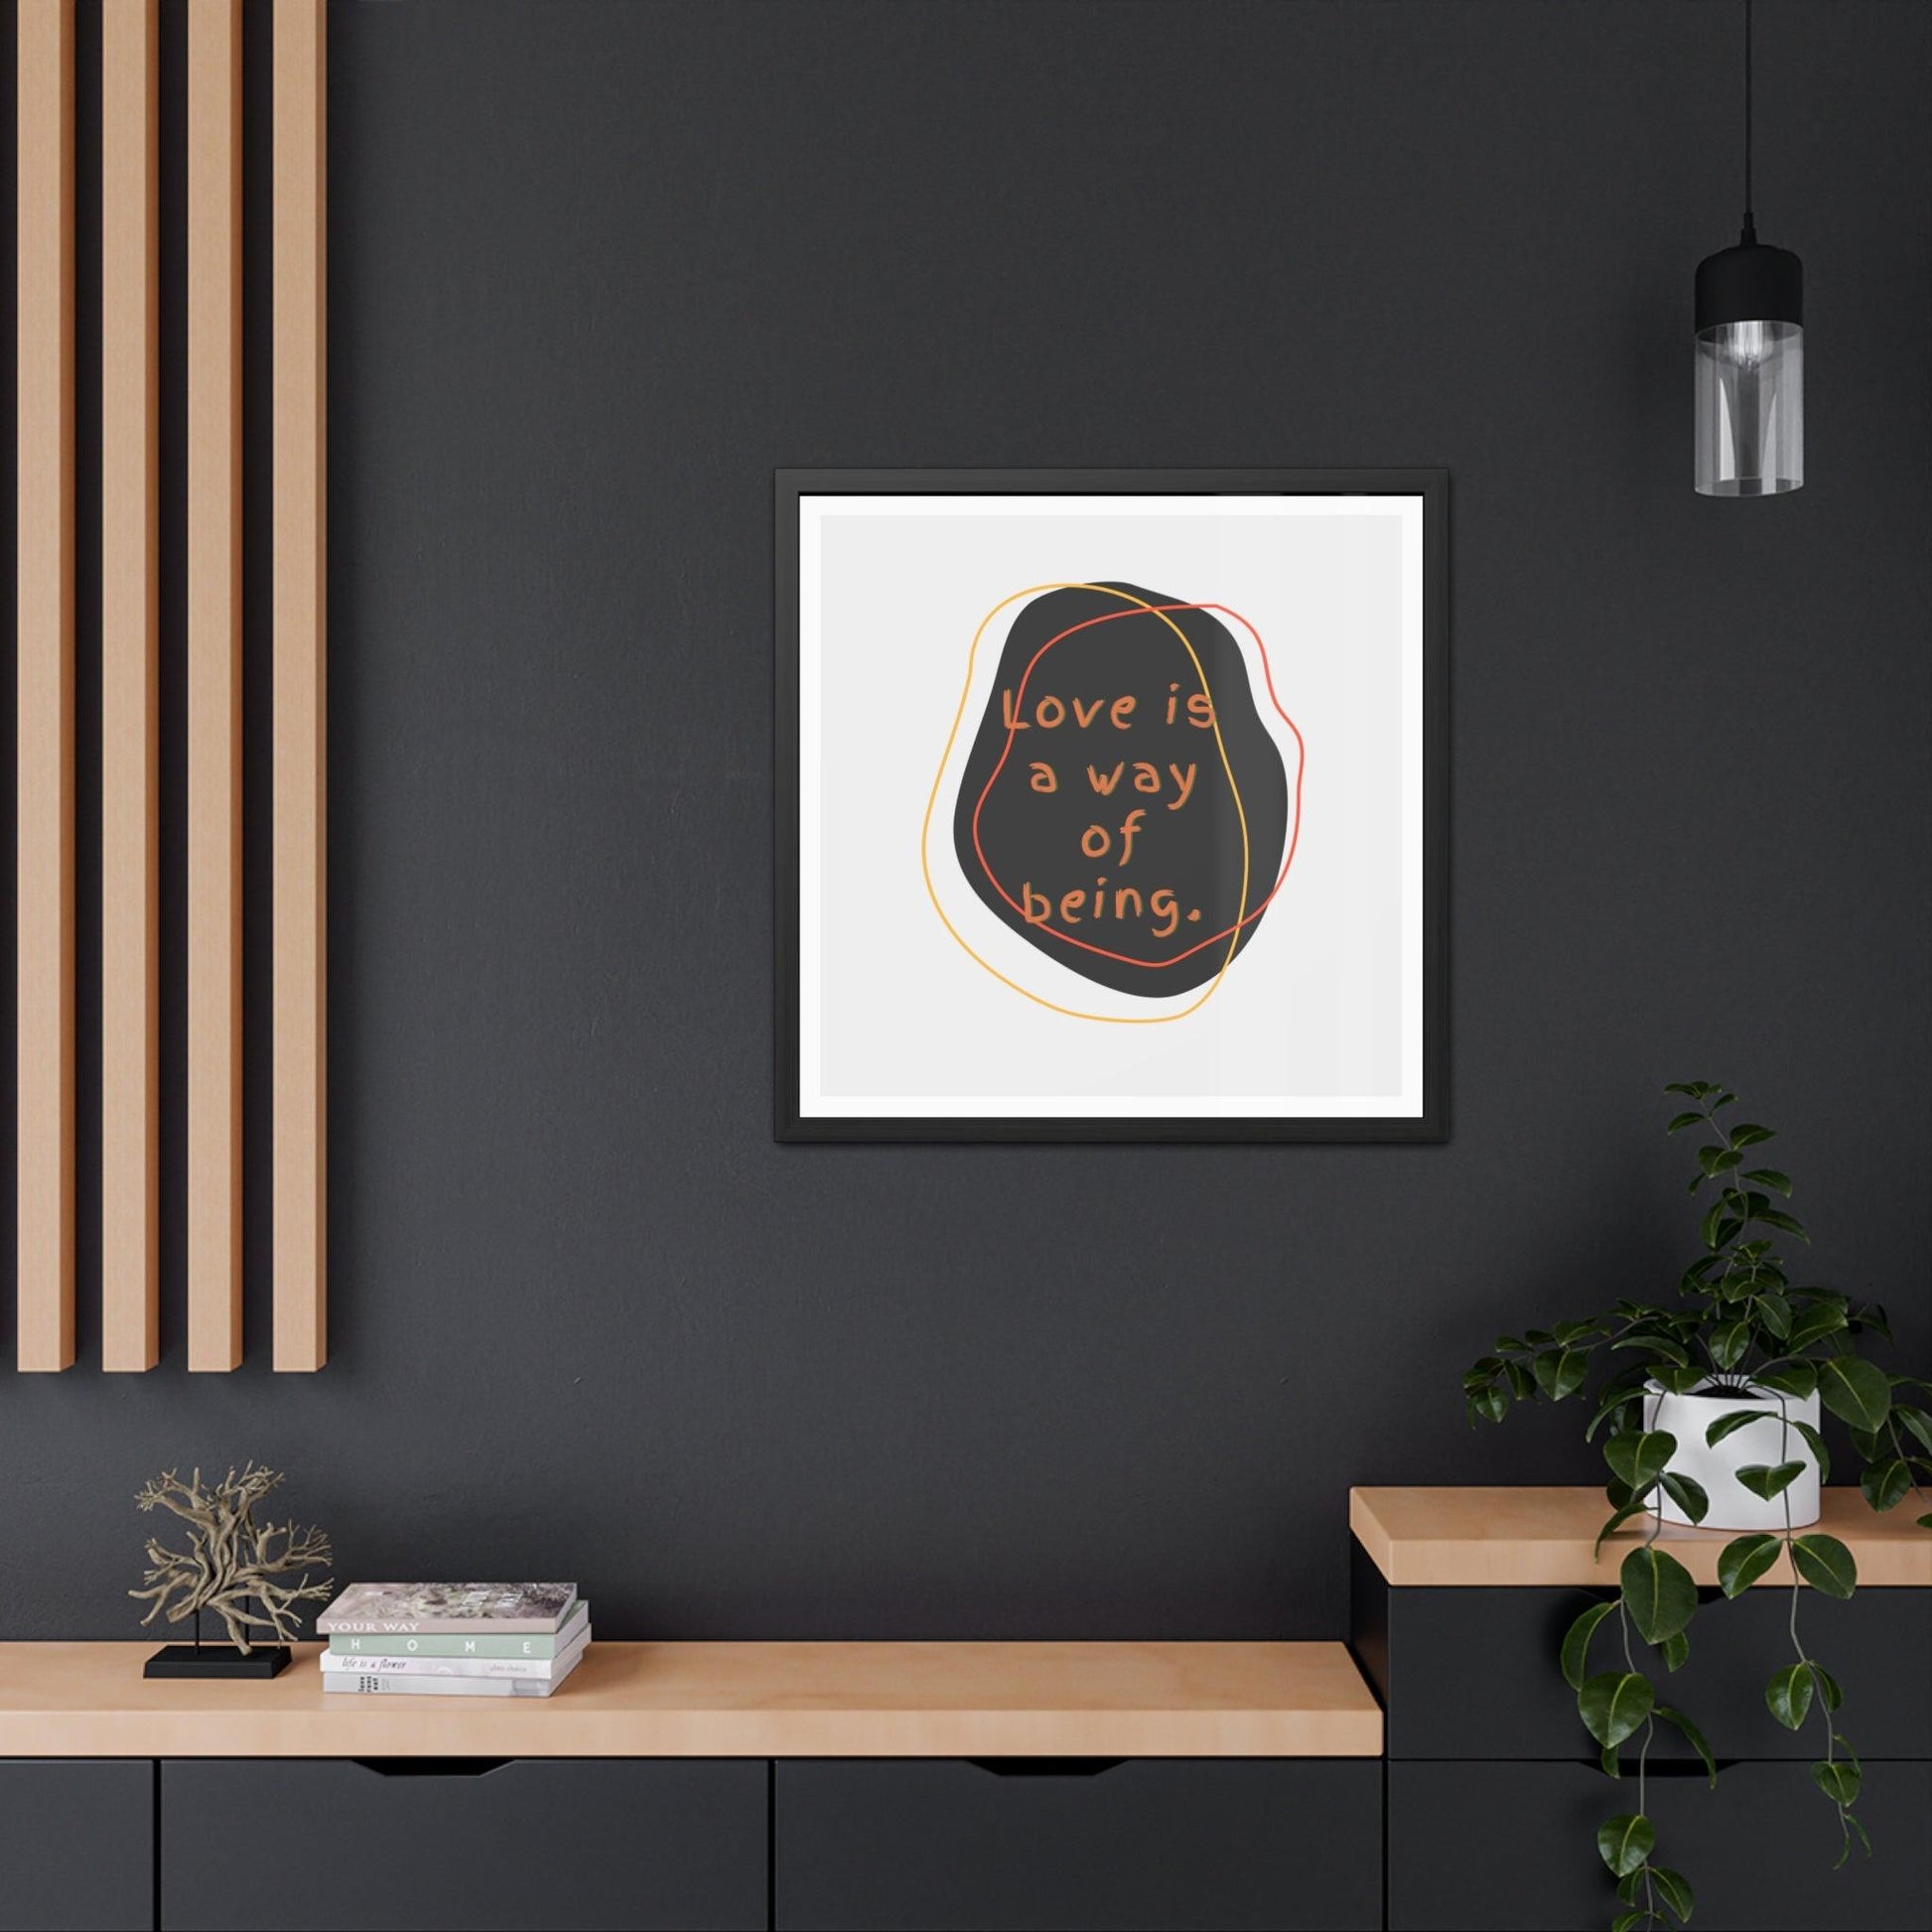 Love is a way of being Black Framed Poster Wall Art - MAIA HOMES